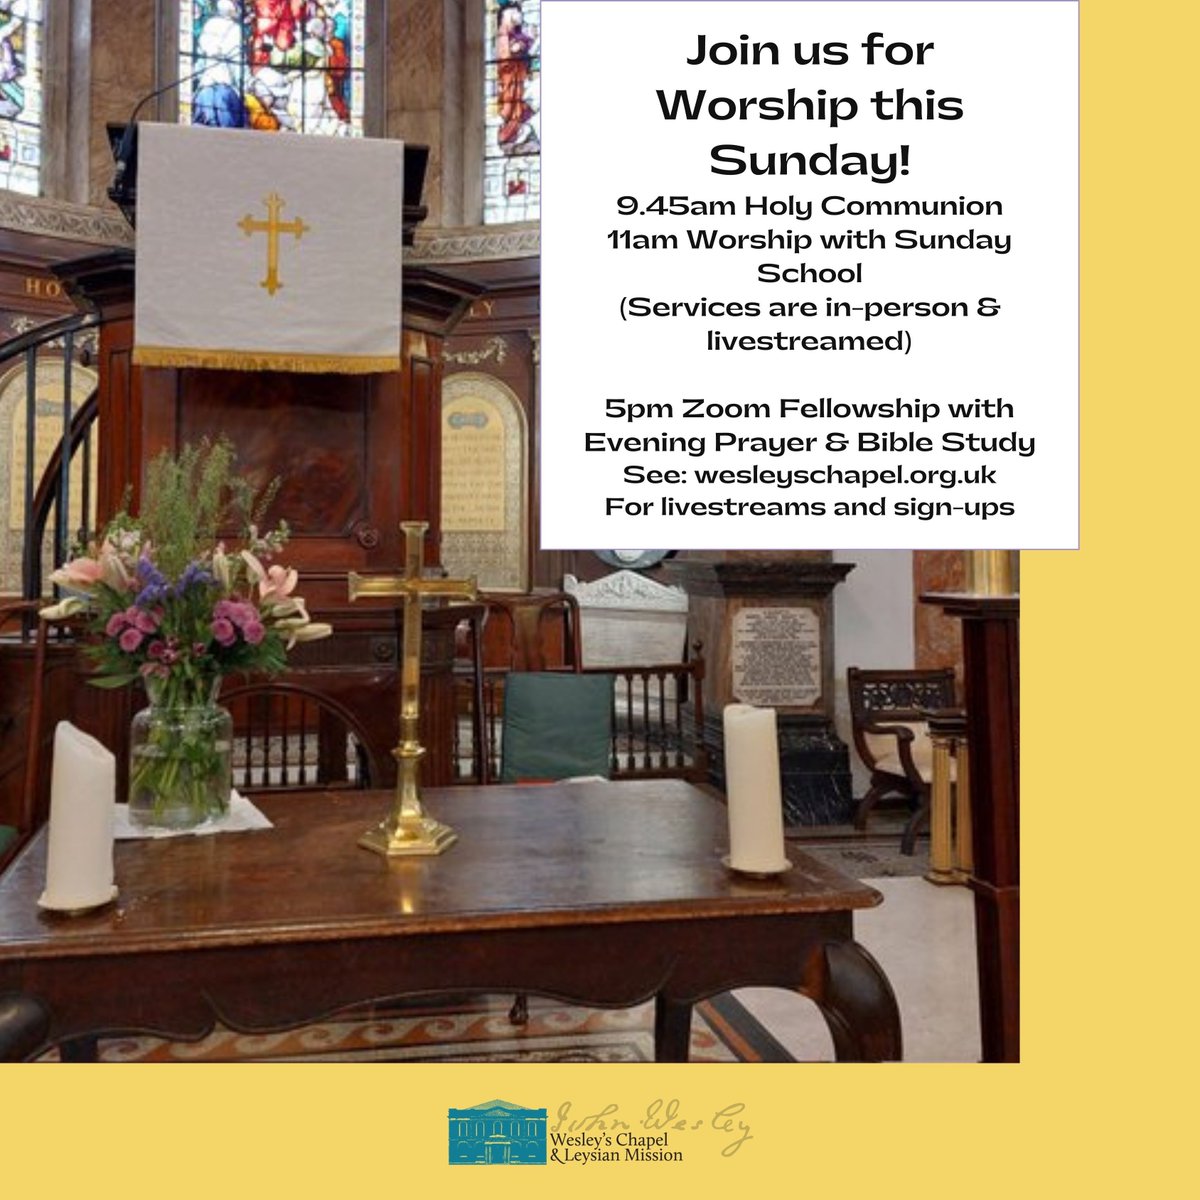 Today we have: Holy Communion at 9.45am Worship with Sunday School at 11am Zoom Fellowship with bible study and evening prayer from 5pm Join us, in person or virtually buff.ly/3PpiEz5